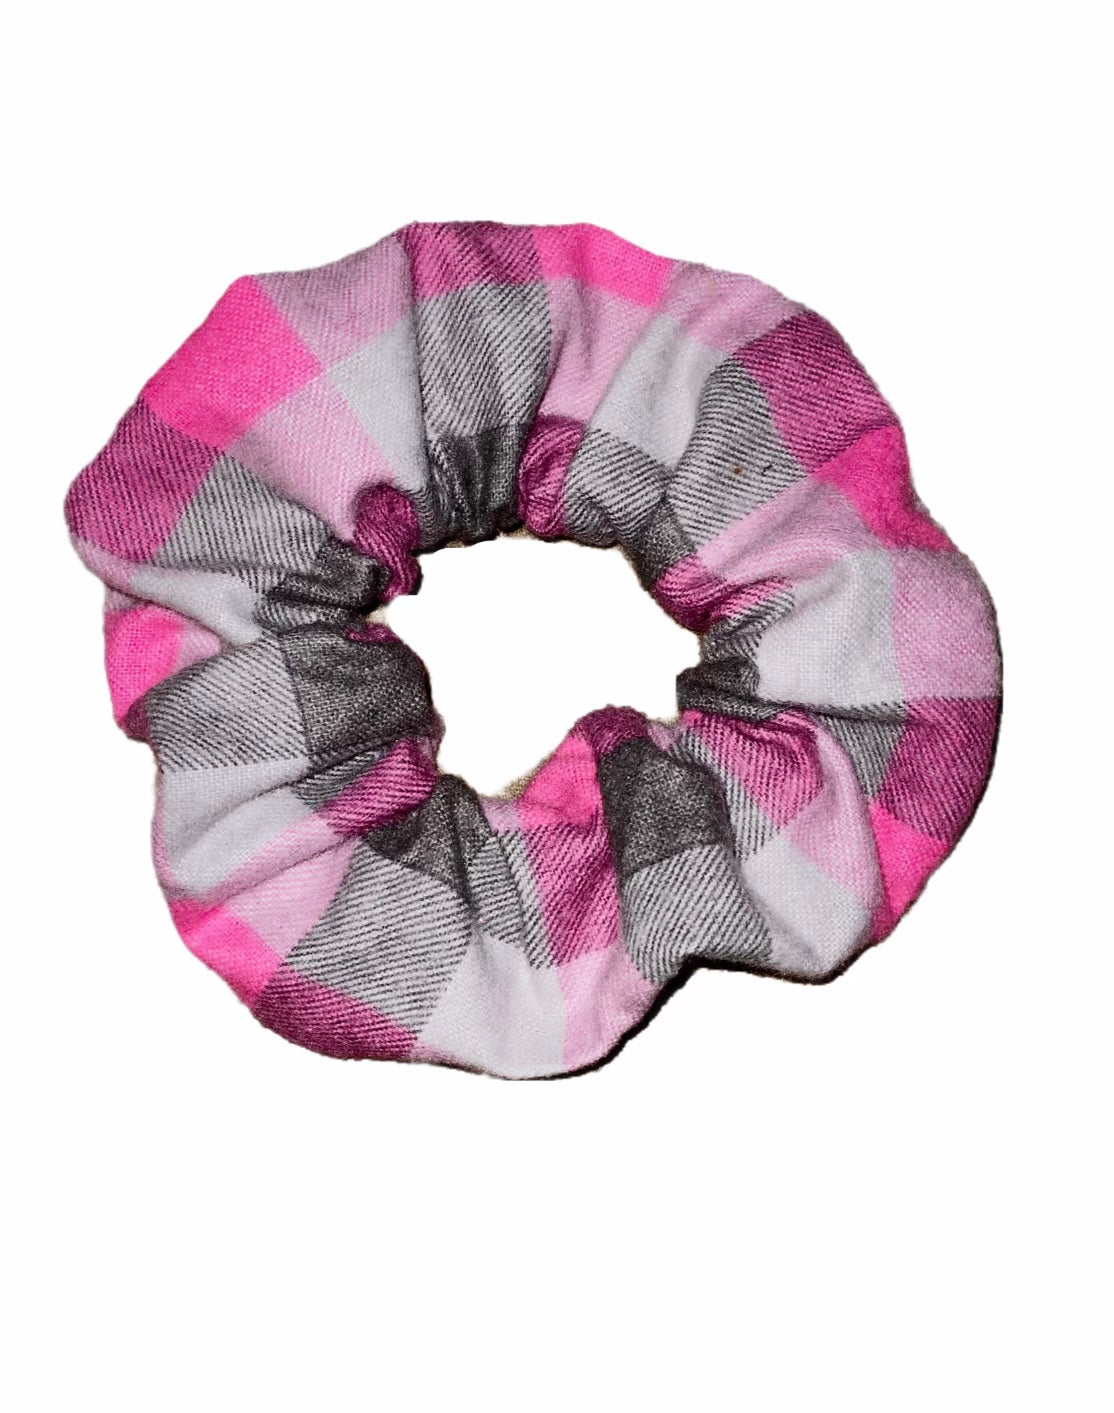 Tied Together Mountain Pink Plaid scrunchie